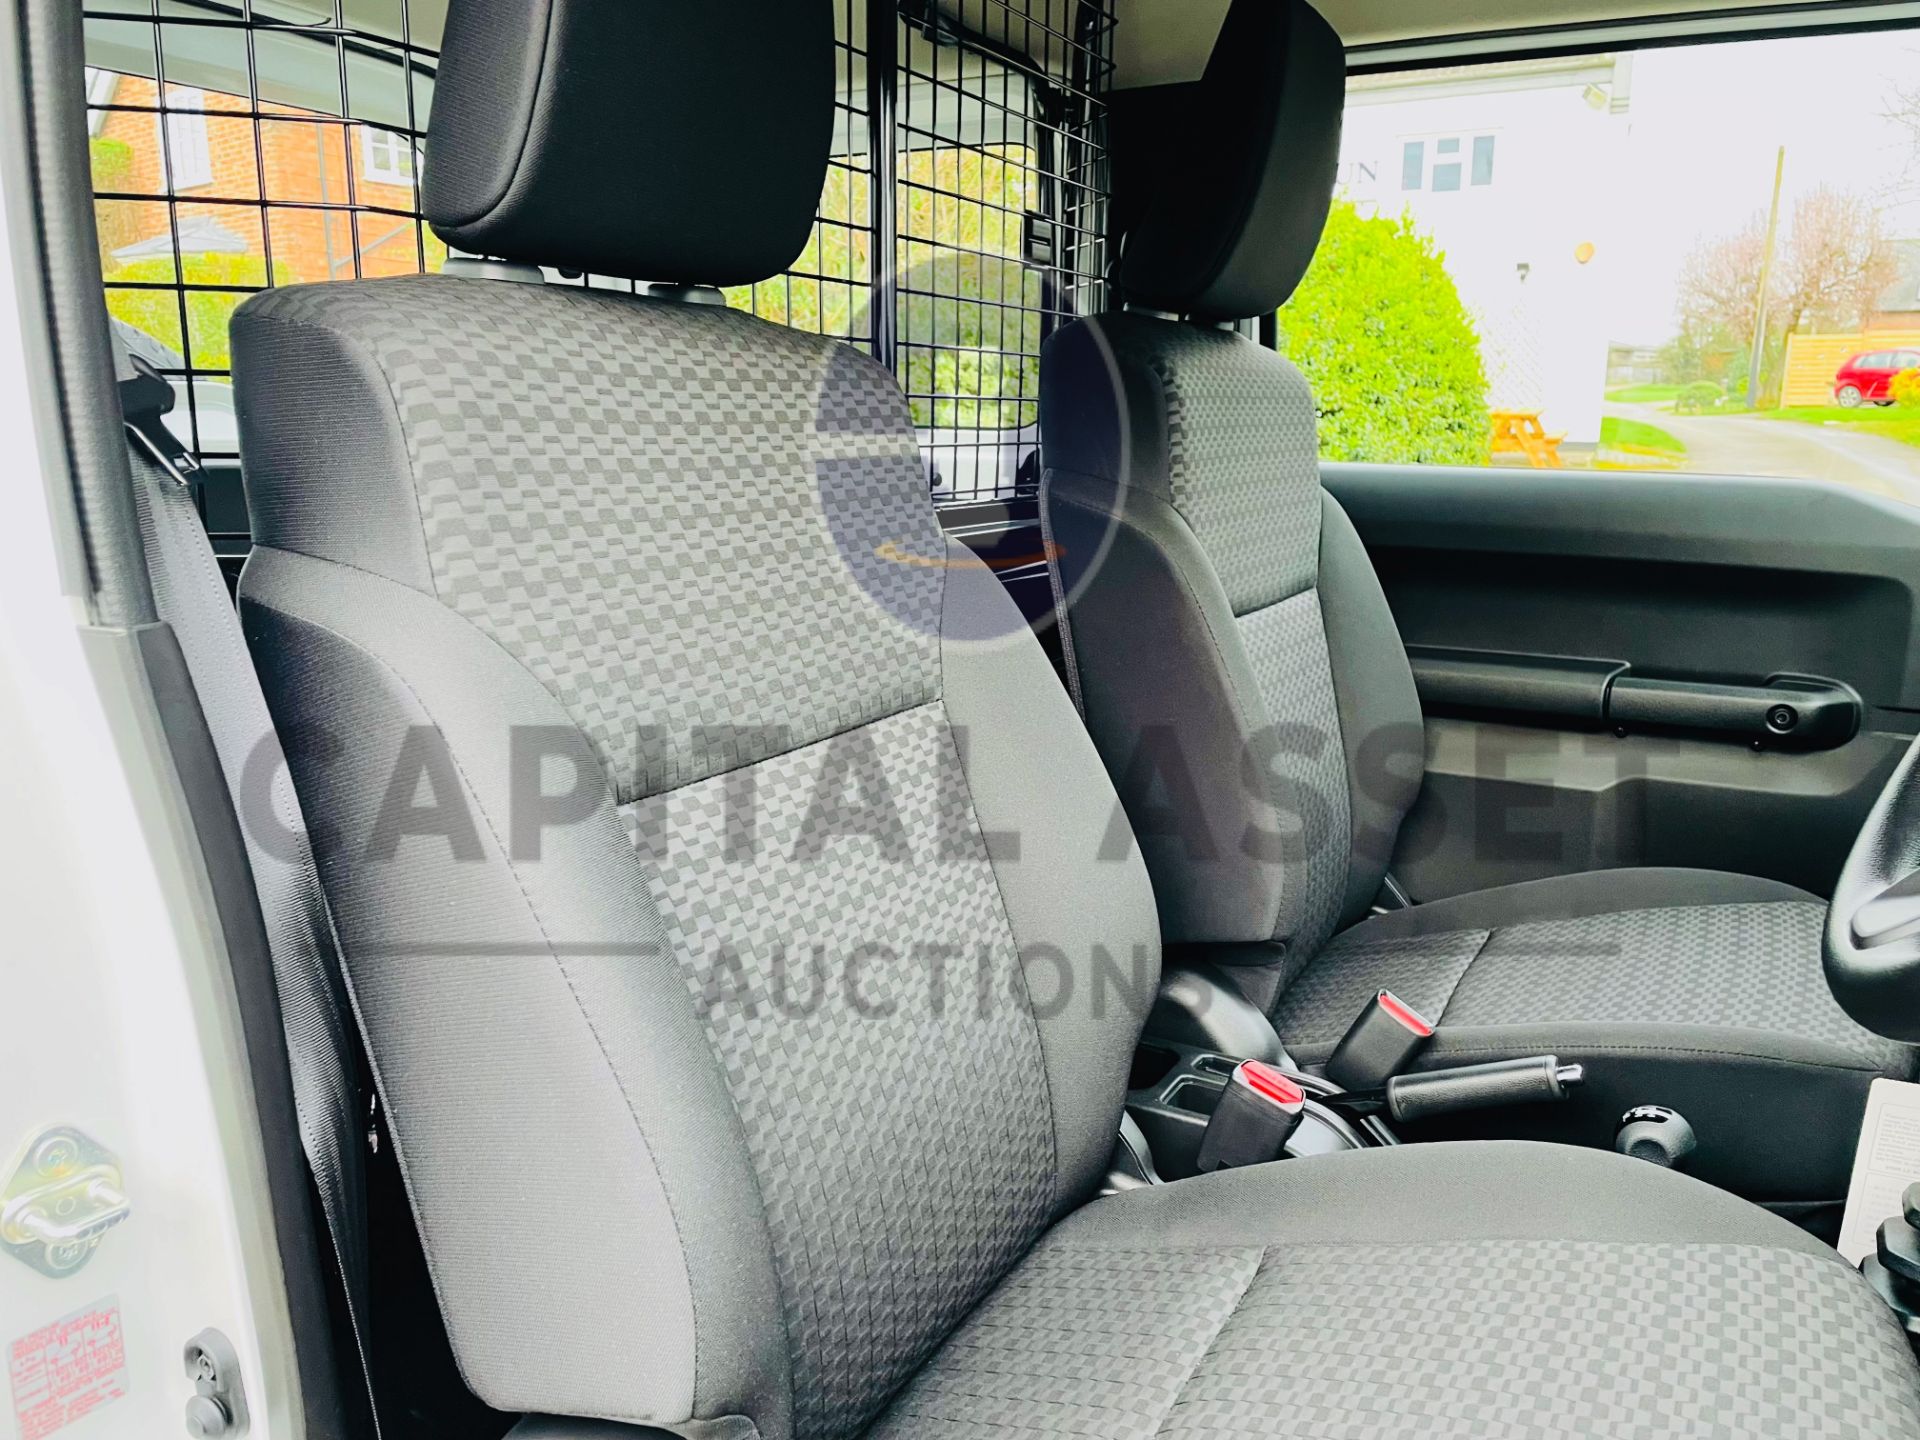 (ON SALE) SUZUKI JIMNY ALLGRIP (24 REG - BRAND NEW) DELIVERY MILEAGE ONLY - BEAT THE WAITING LIST - Image 11 of 24